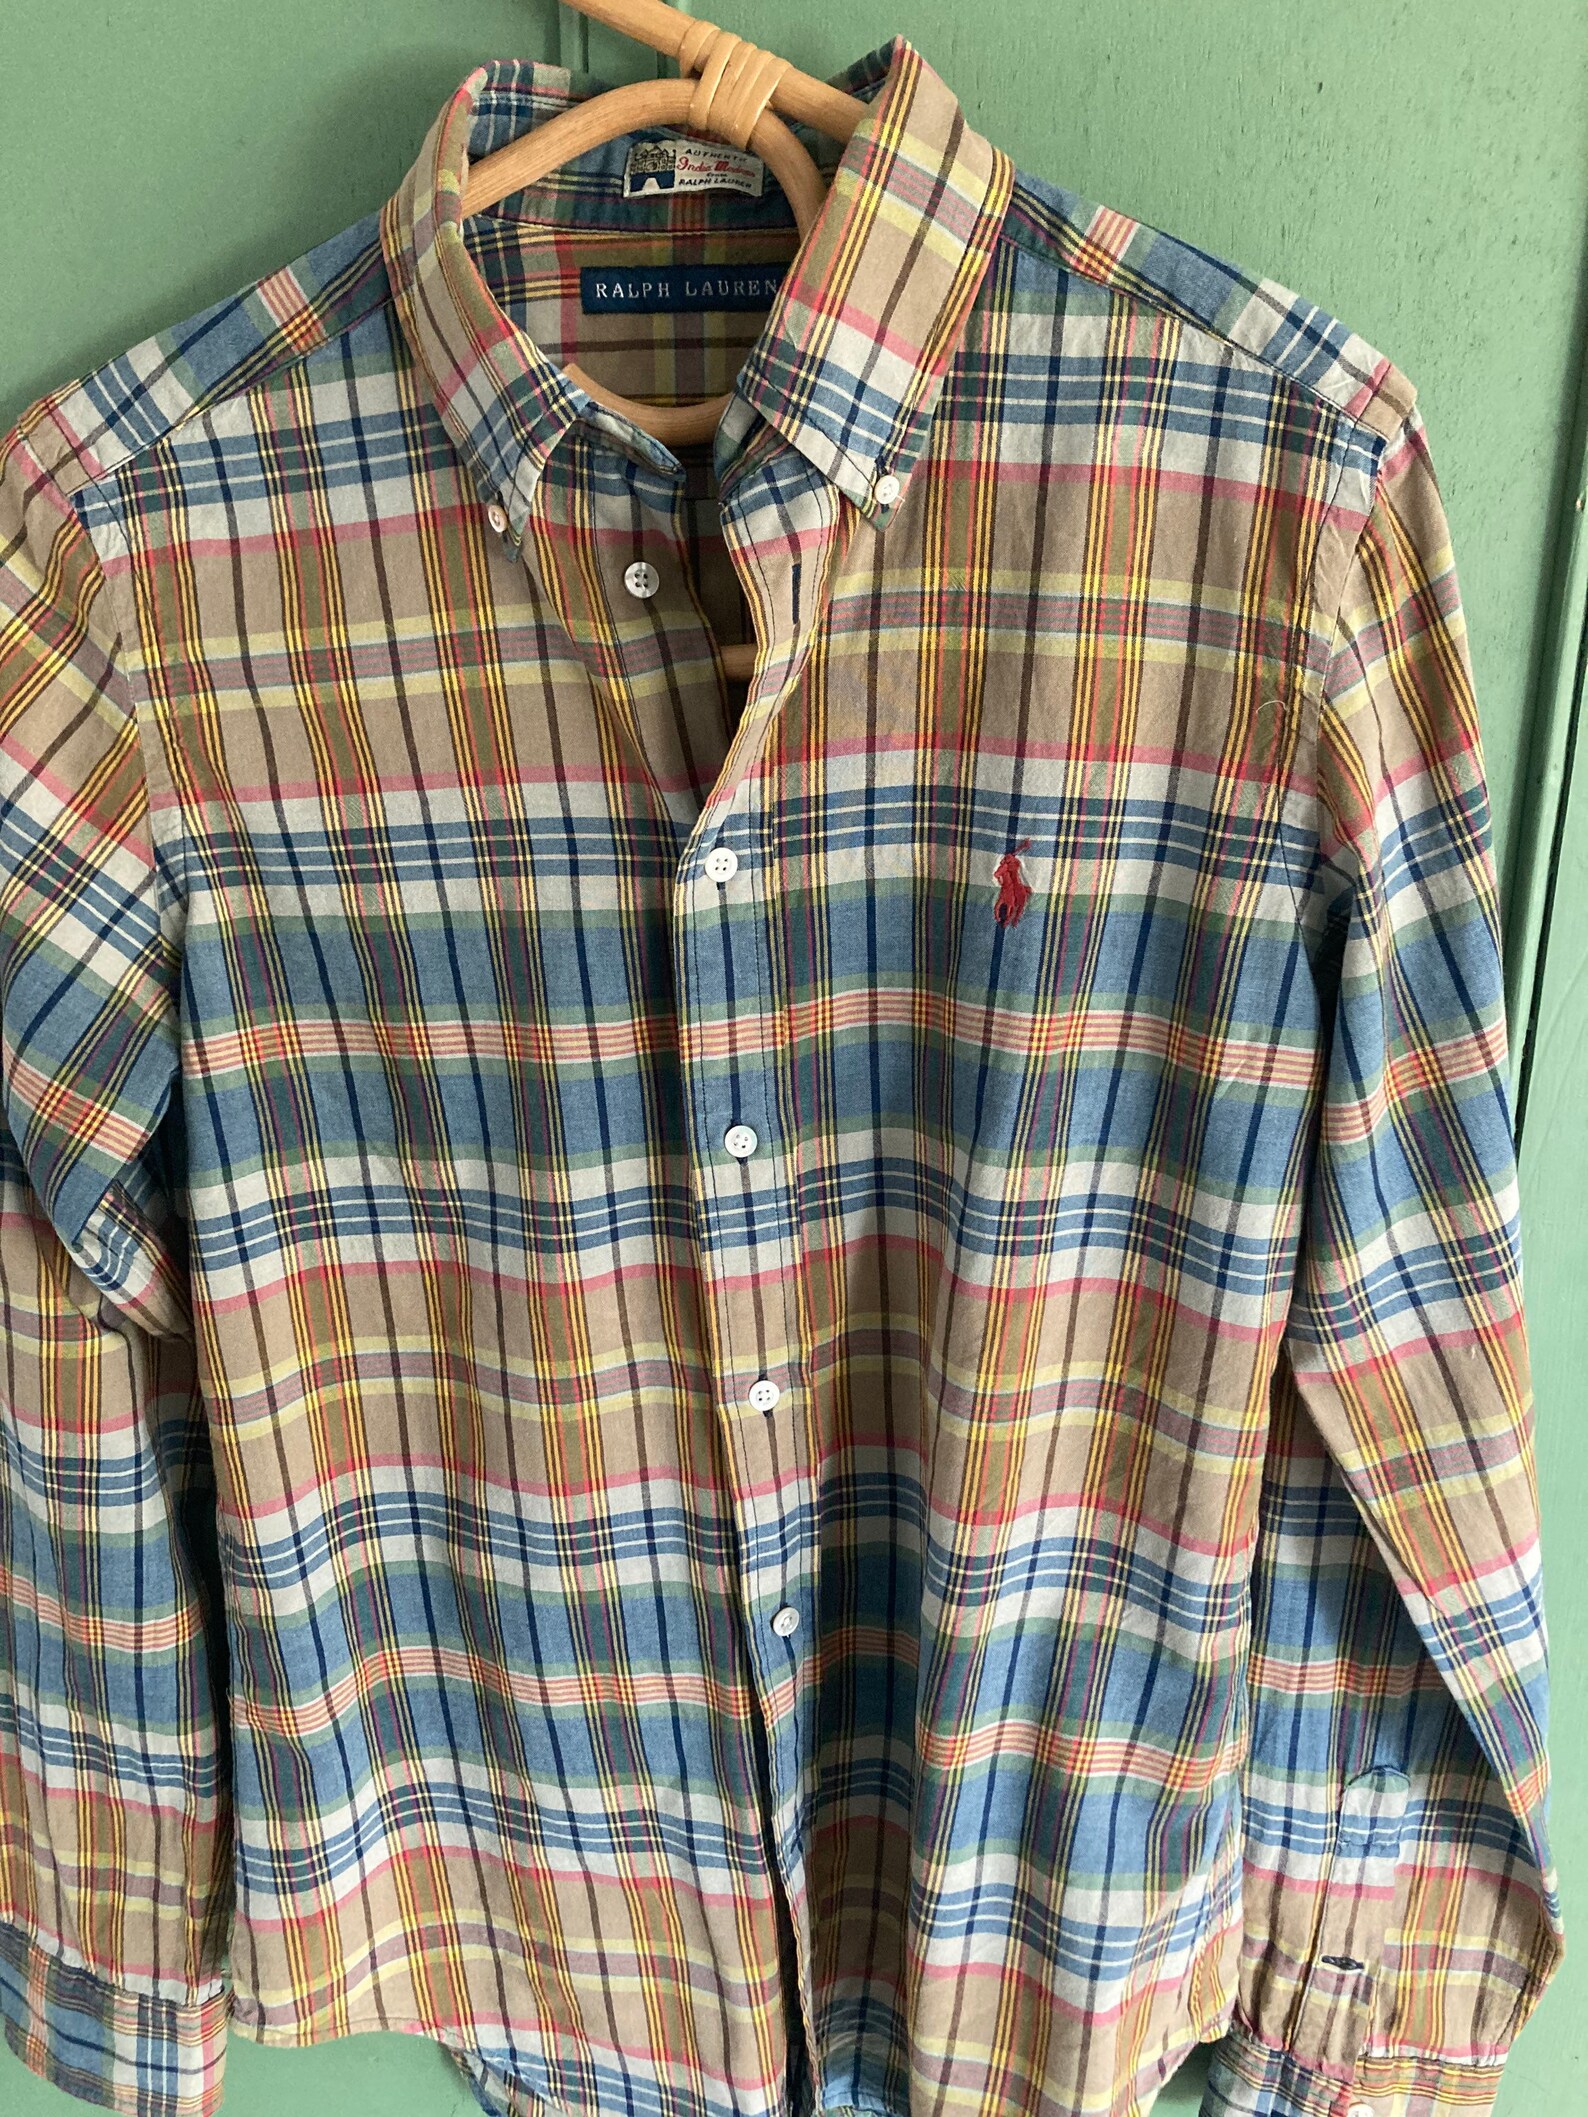 Ralph Lauren Indian Madras Cotton Shirt Size S in Good Used - Etsy